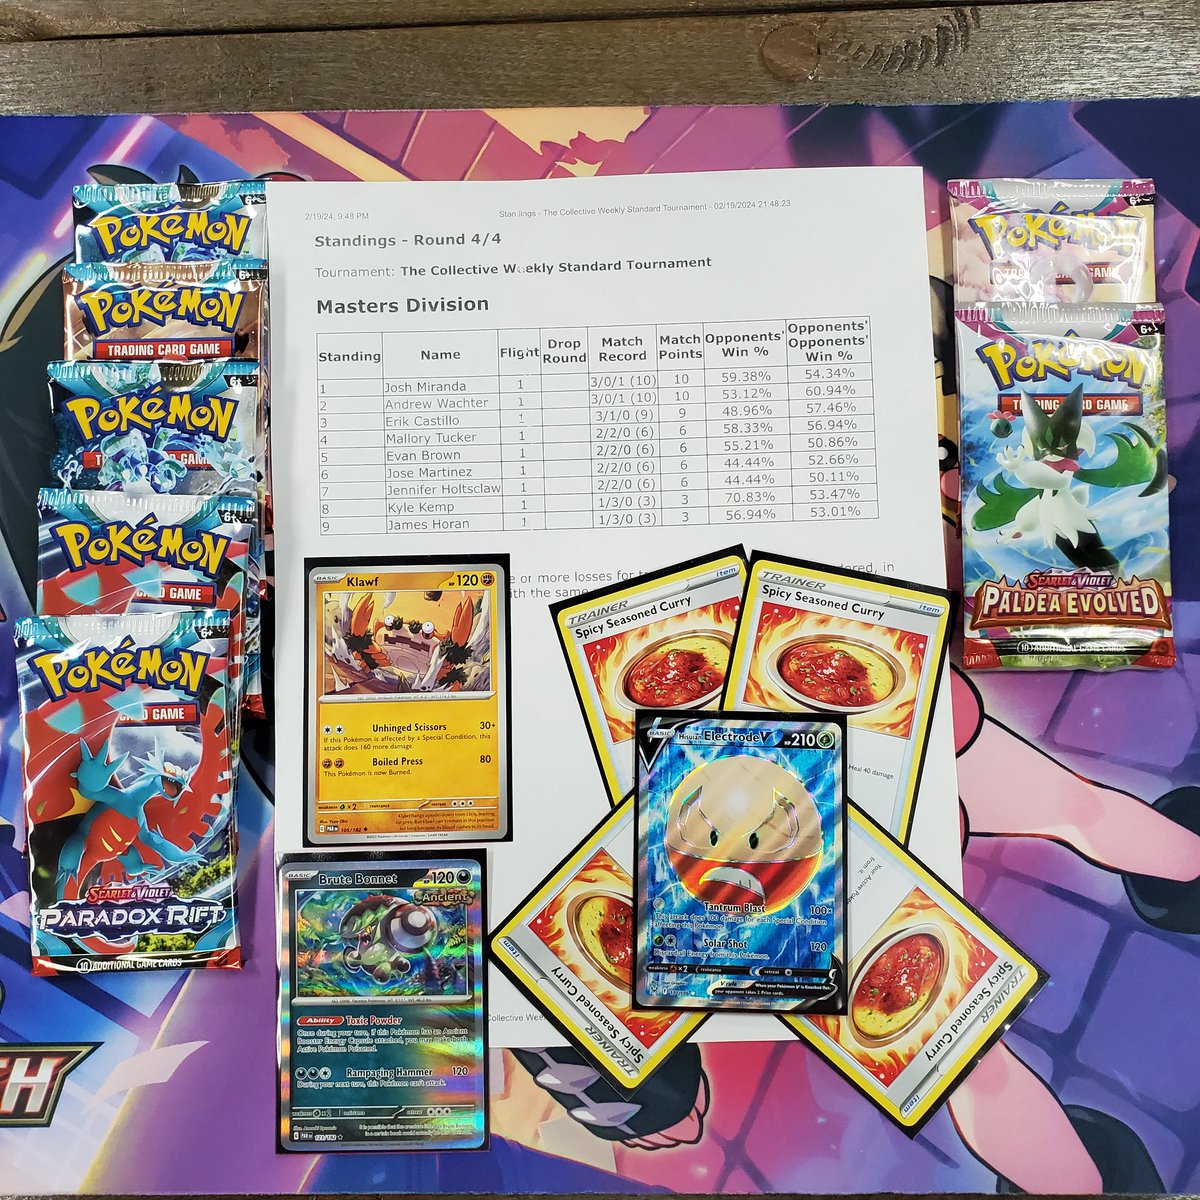 Placed 1st at @CollectiveCCG Pokemon tournament with Klawf! 🦀 

W Mewtwo V-Union
W Roaring Moon
W Charizard ex
ID Charizard ex (but won for fun!) 

Gonna get all the mileage I can outta this deck before rotation 🍛